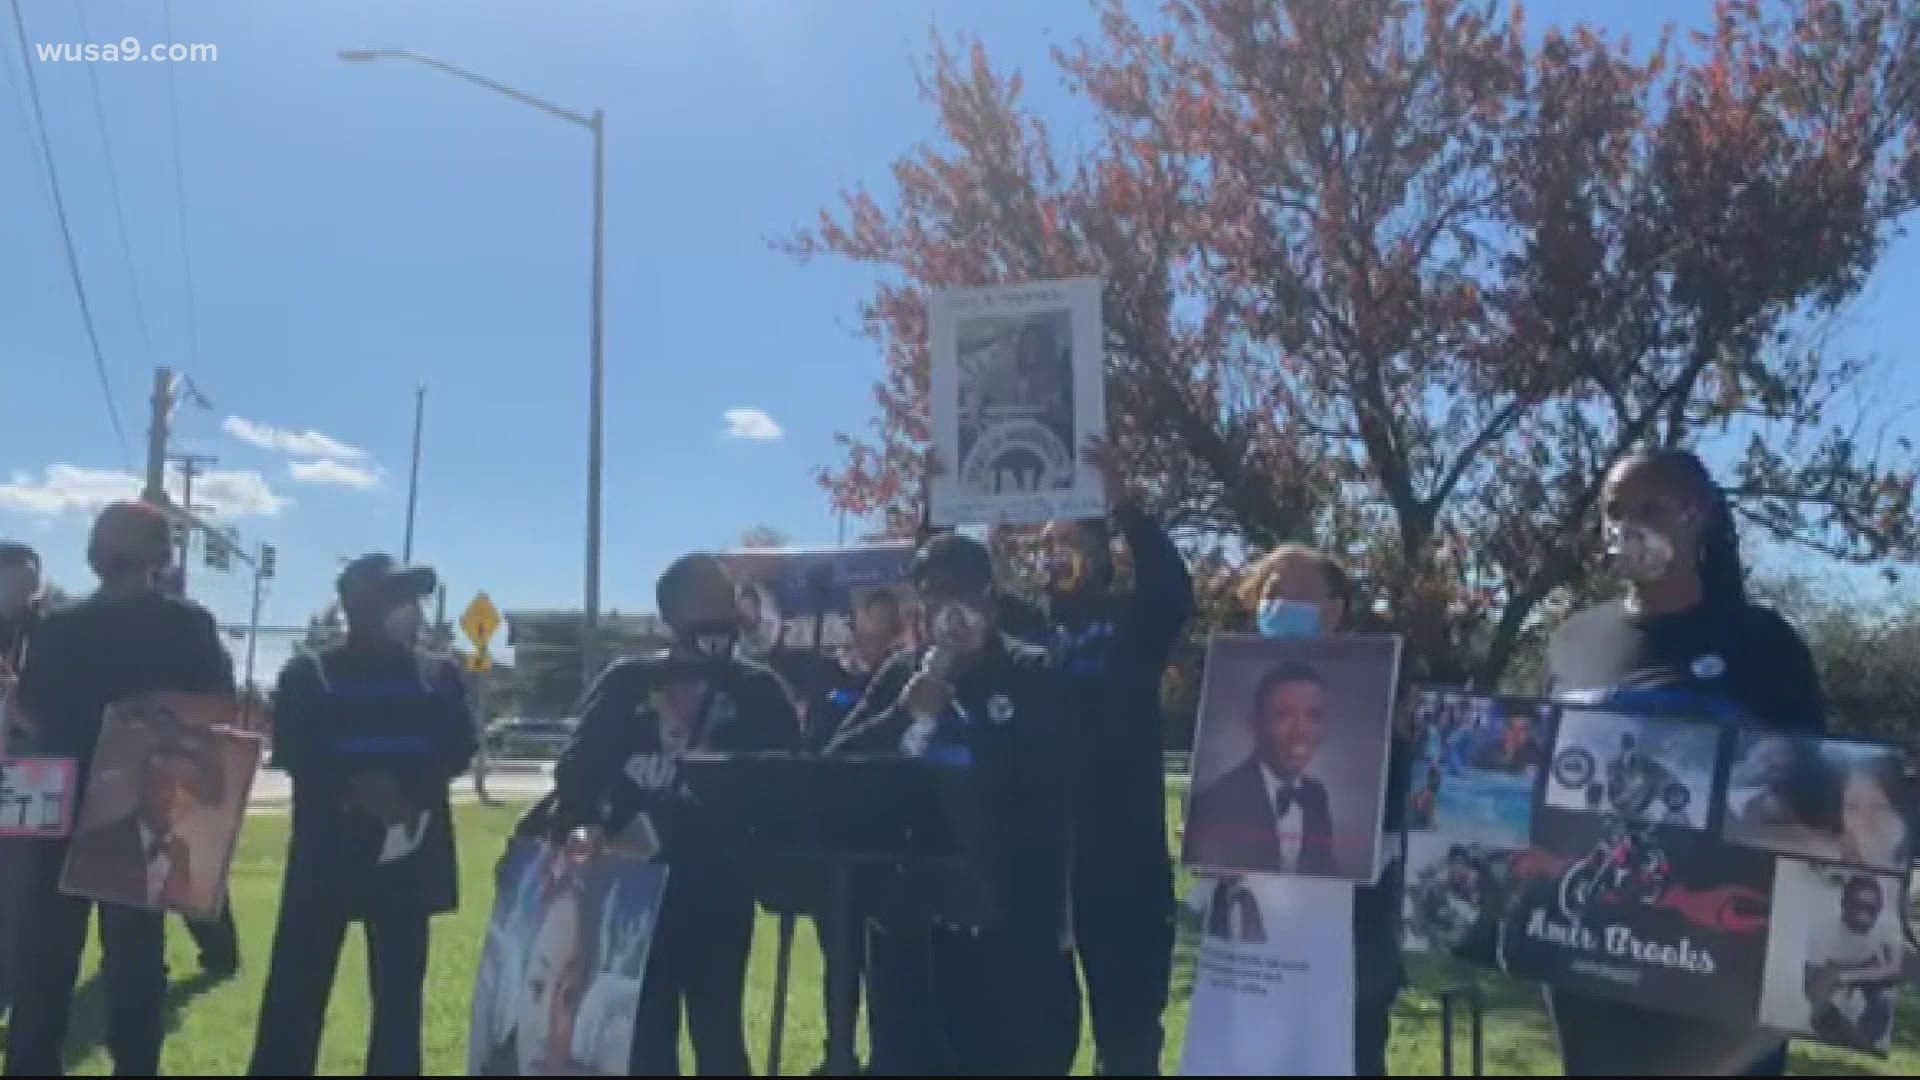 Before the gathering at Alsobrooks home, protesters were reportedly at a rally in Forestville that featured family members of loved ones killed by police.